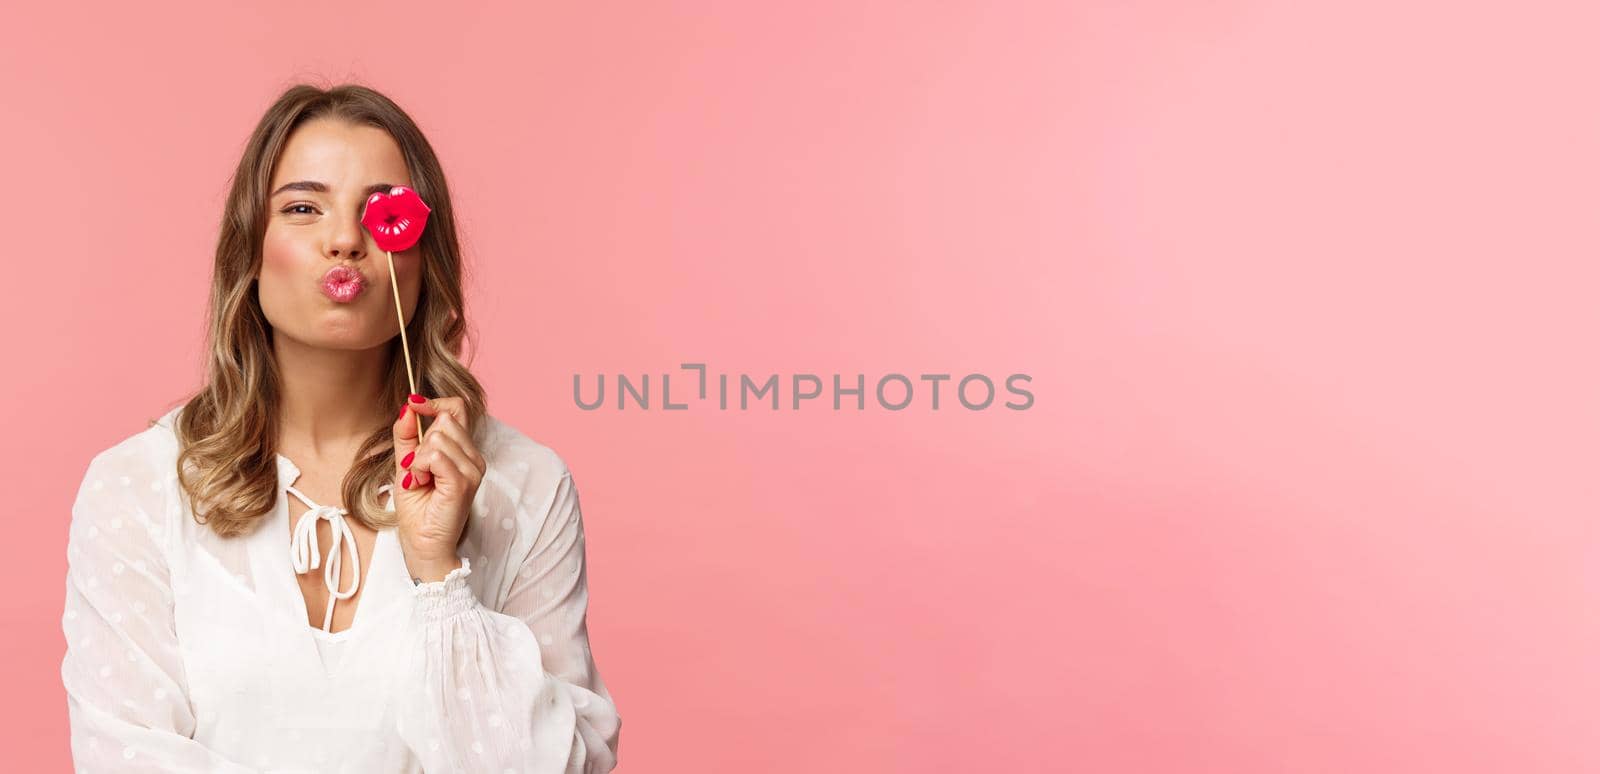 Spring, happiness and celebration concept. Close-up portrait of feminine lovely blond girl in white dress, folding lips in kiss and holding carton stick, partying having fun, stand pink background.